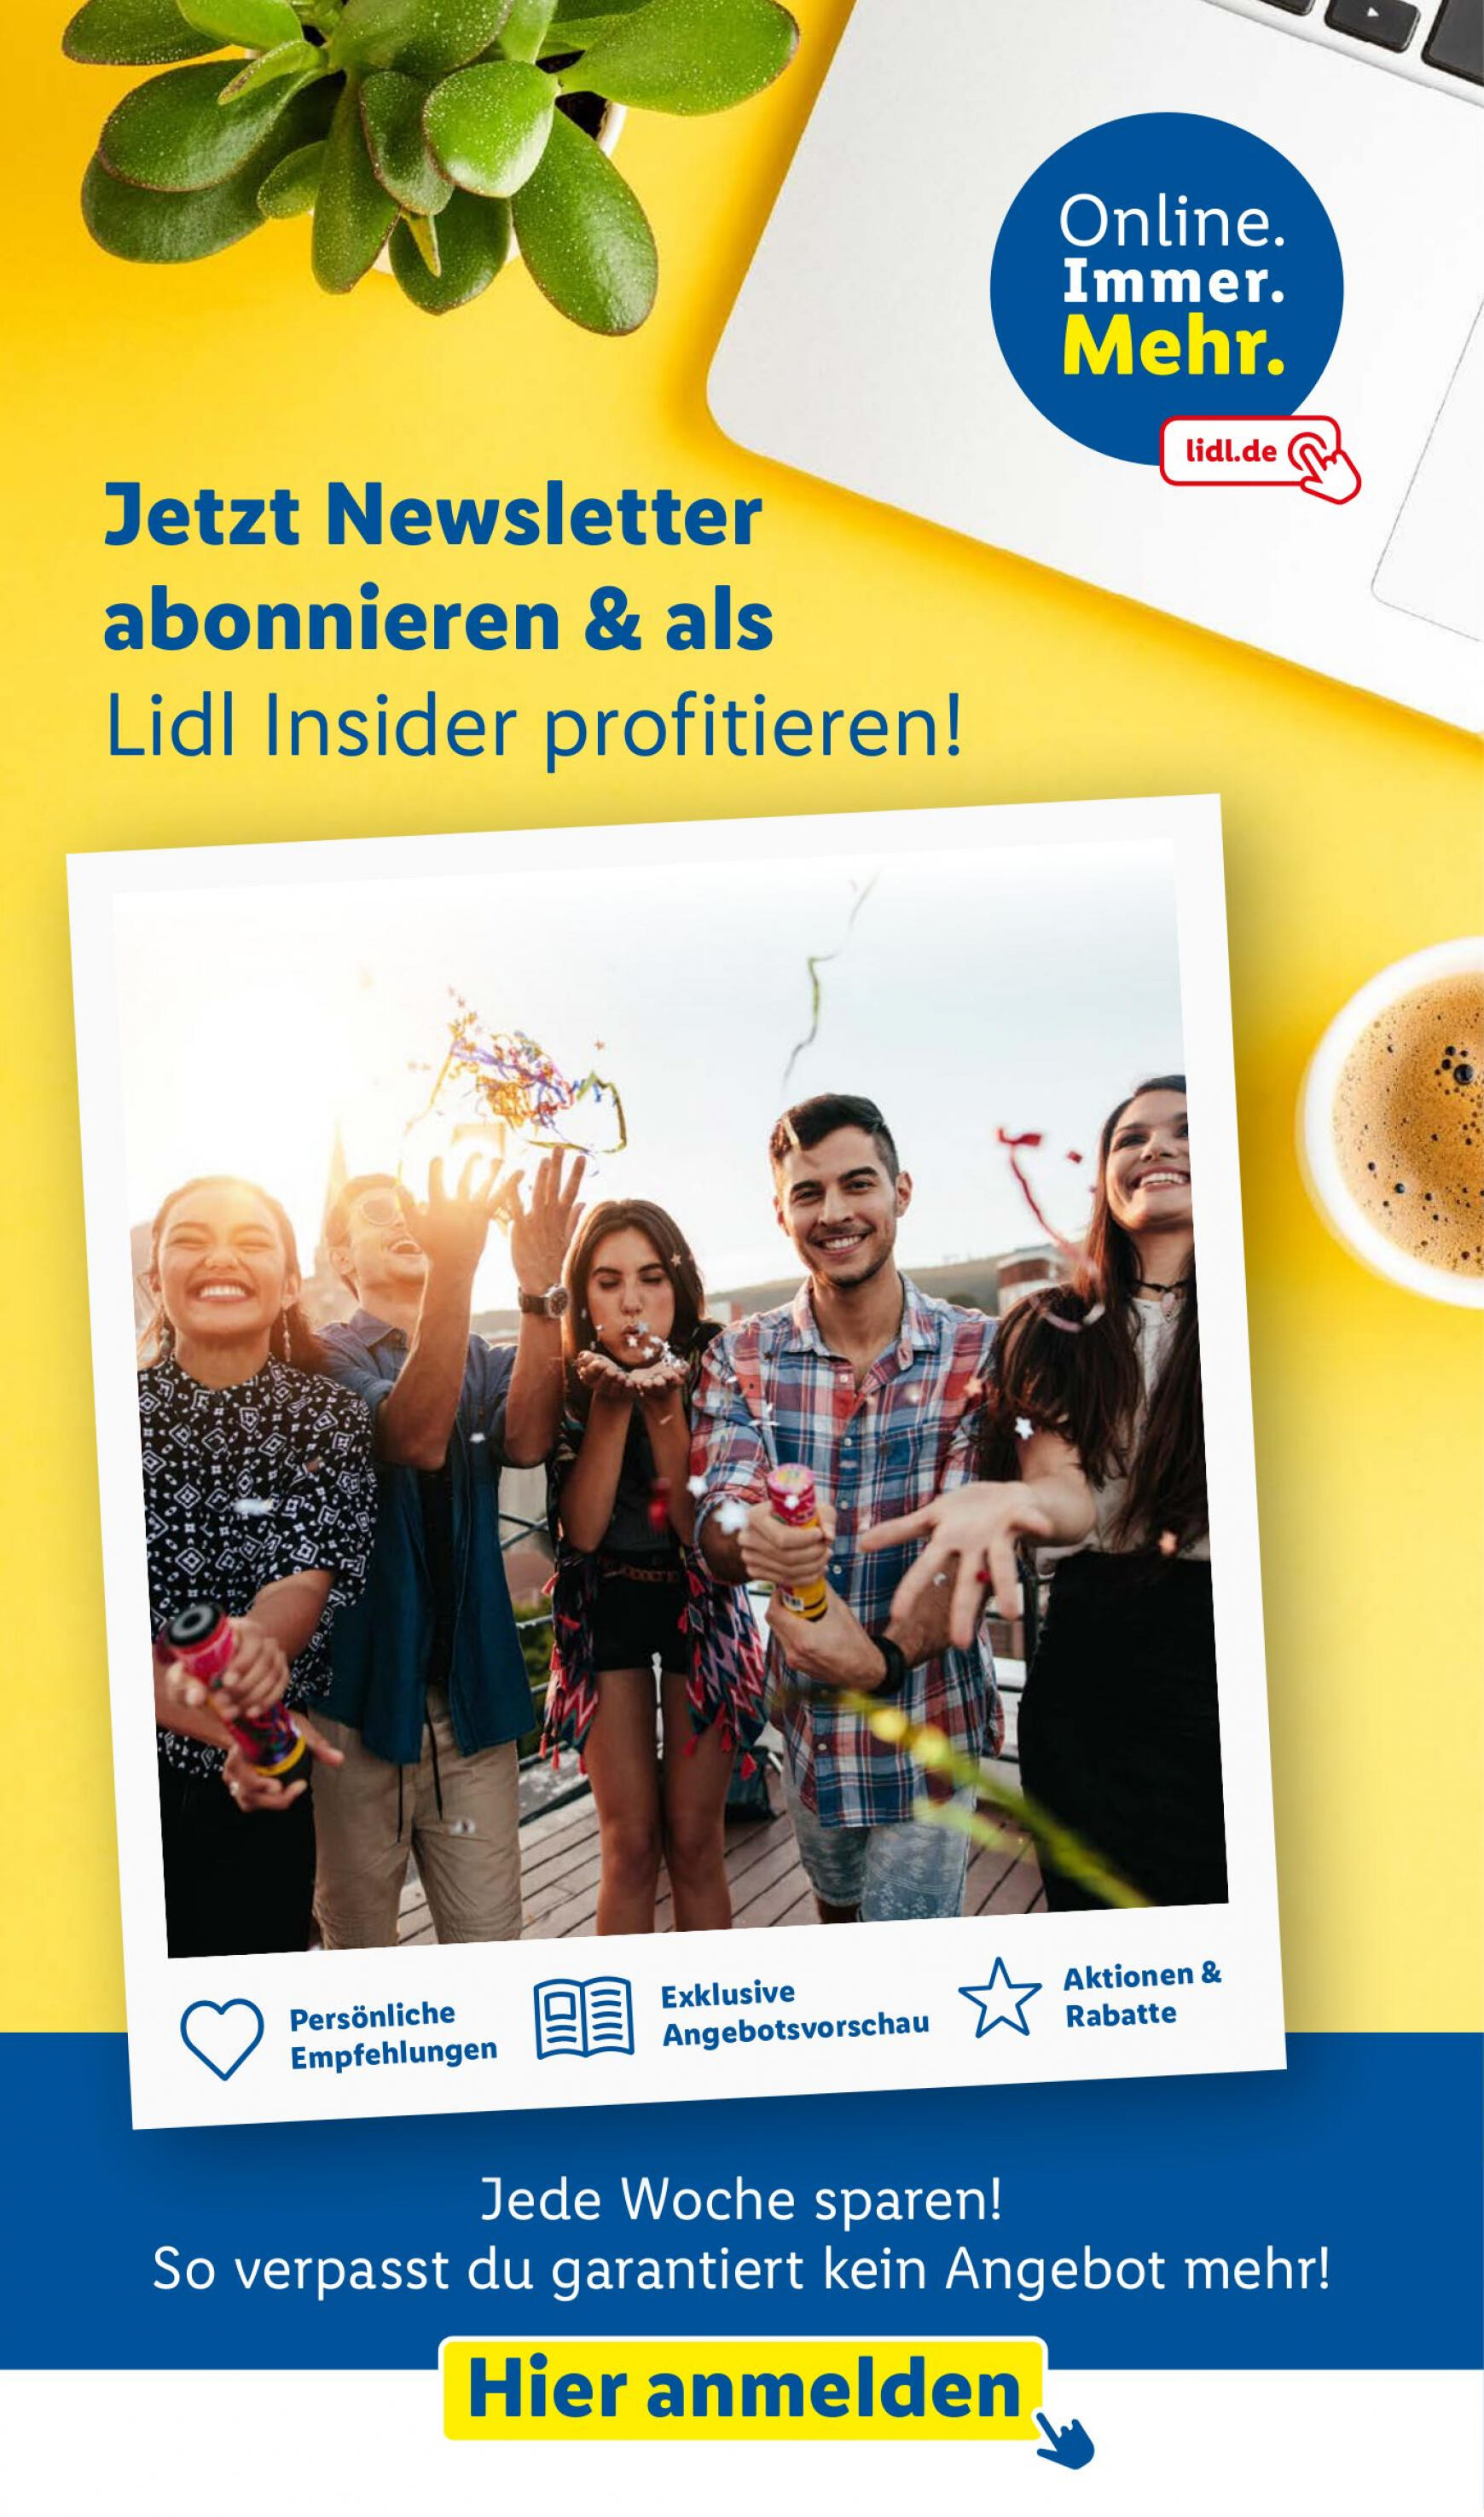 lidl - Flyer Lidl aktuell 15.04. - 20.04. - page: 61